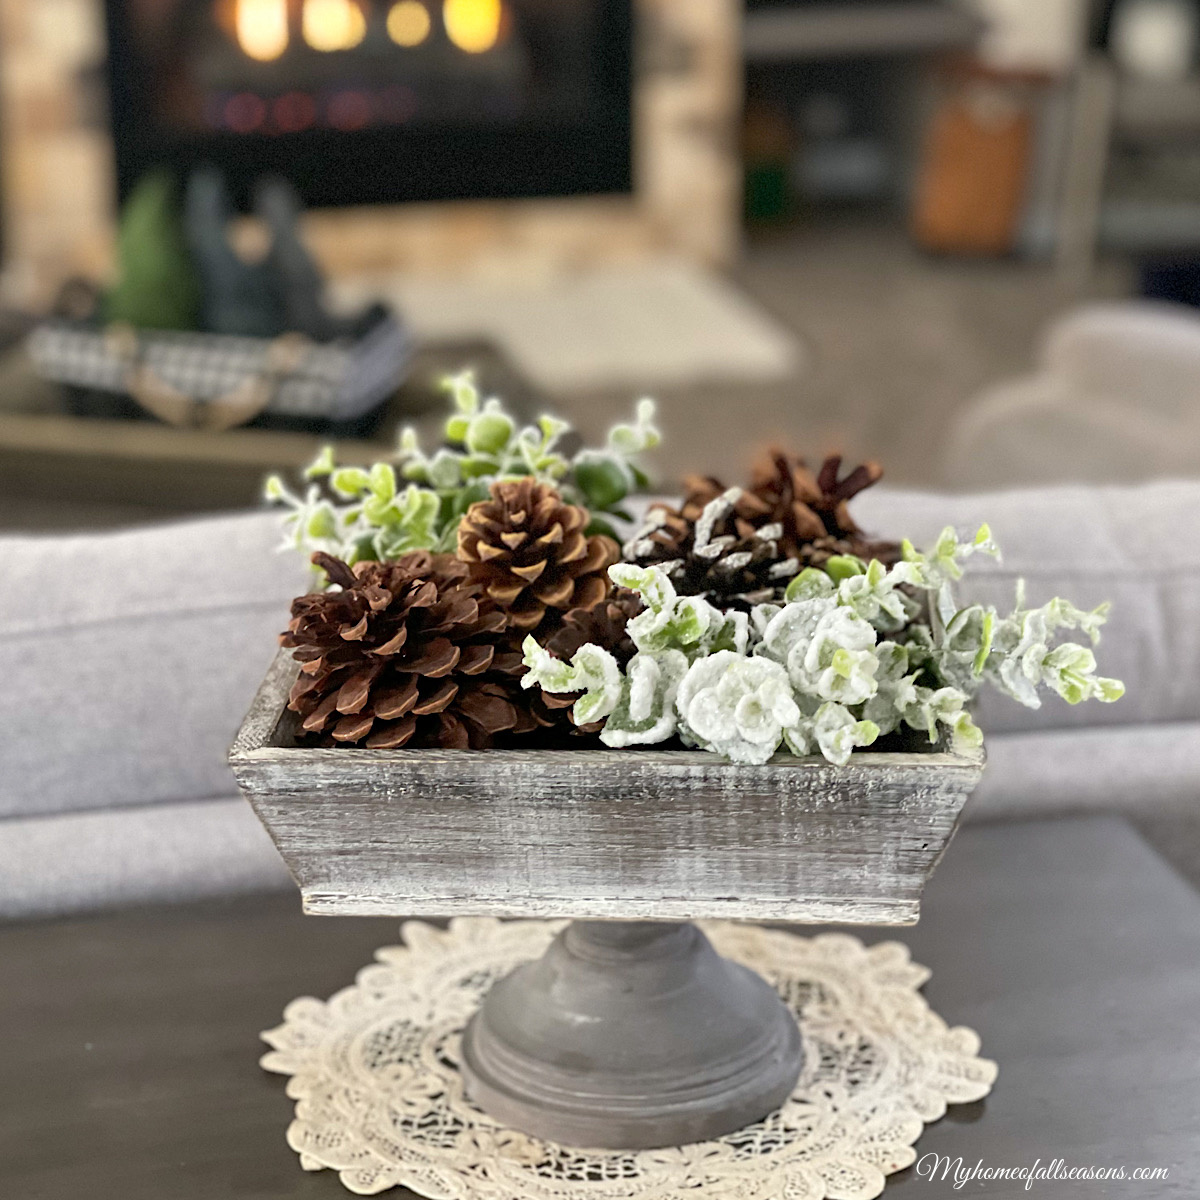 5 Easy Ways to Welcome Winter into Your Home